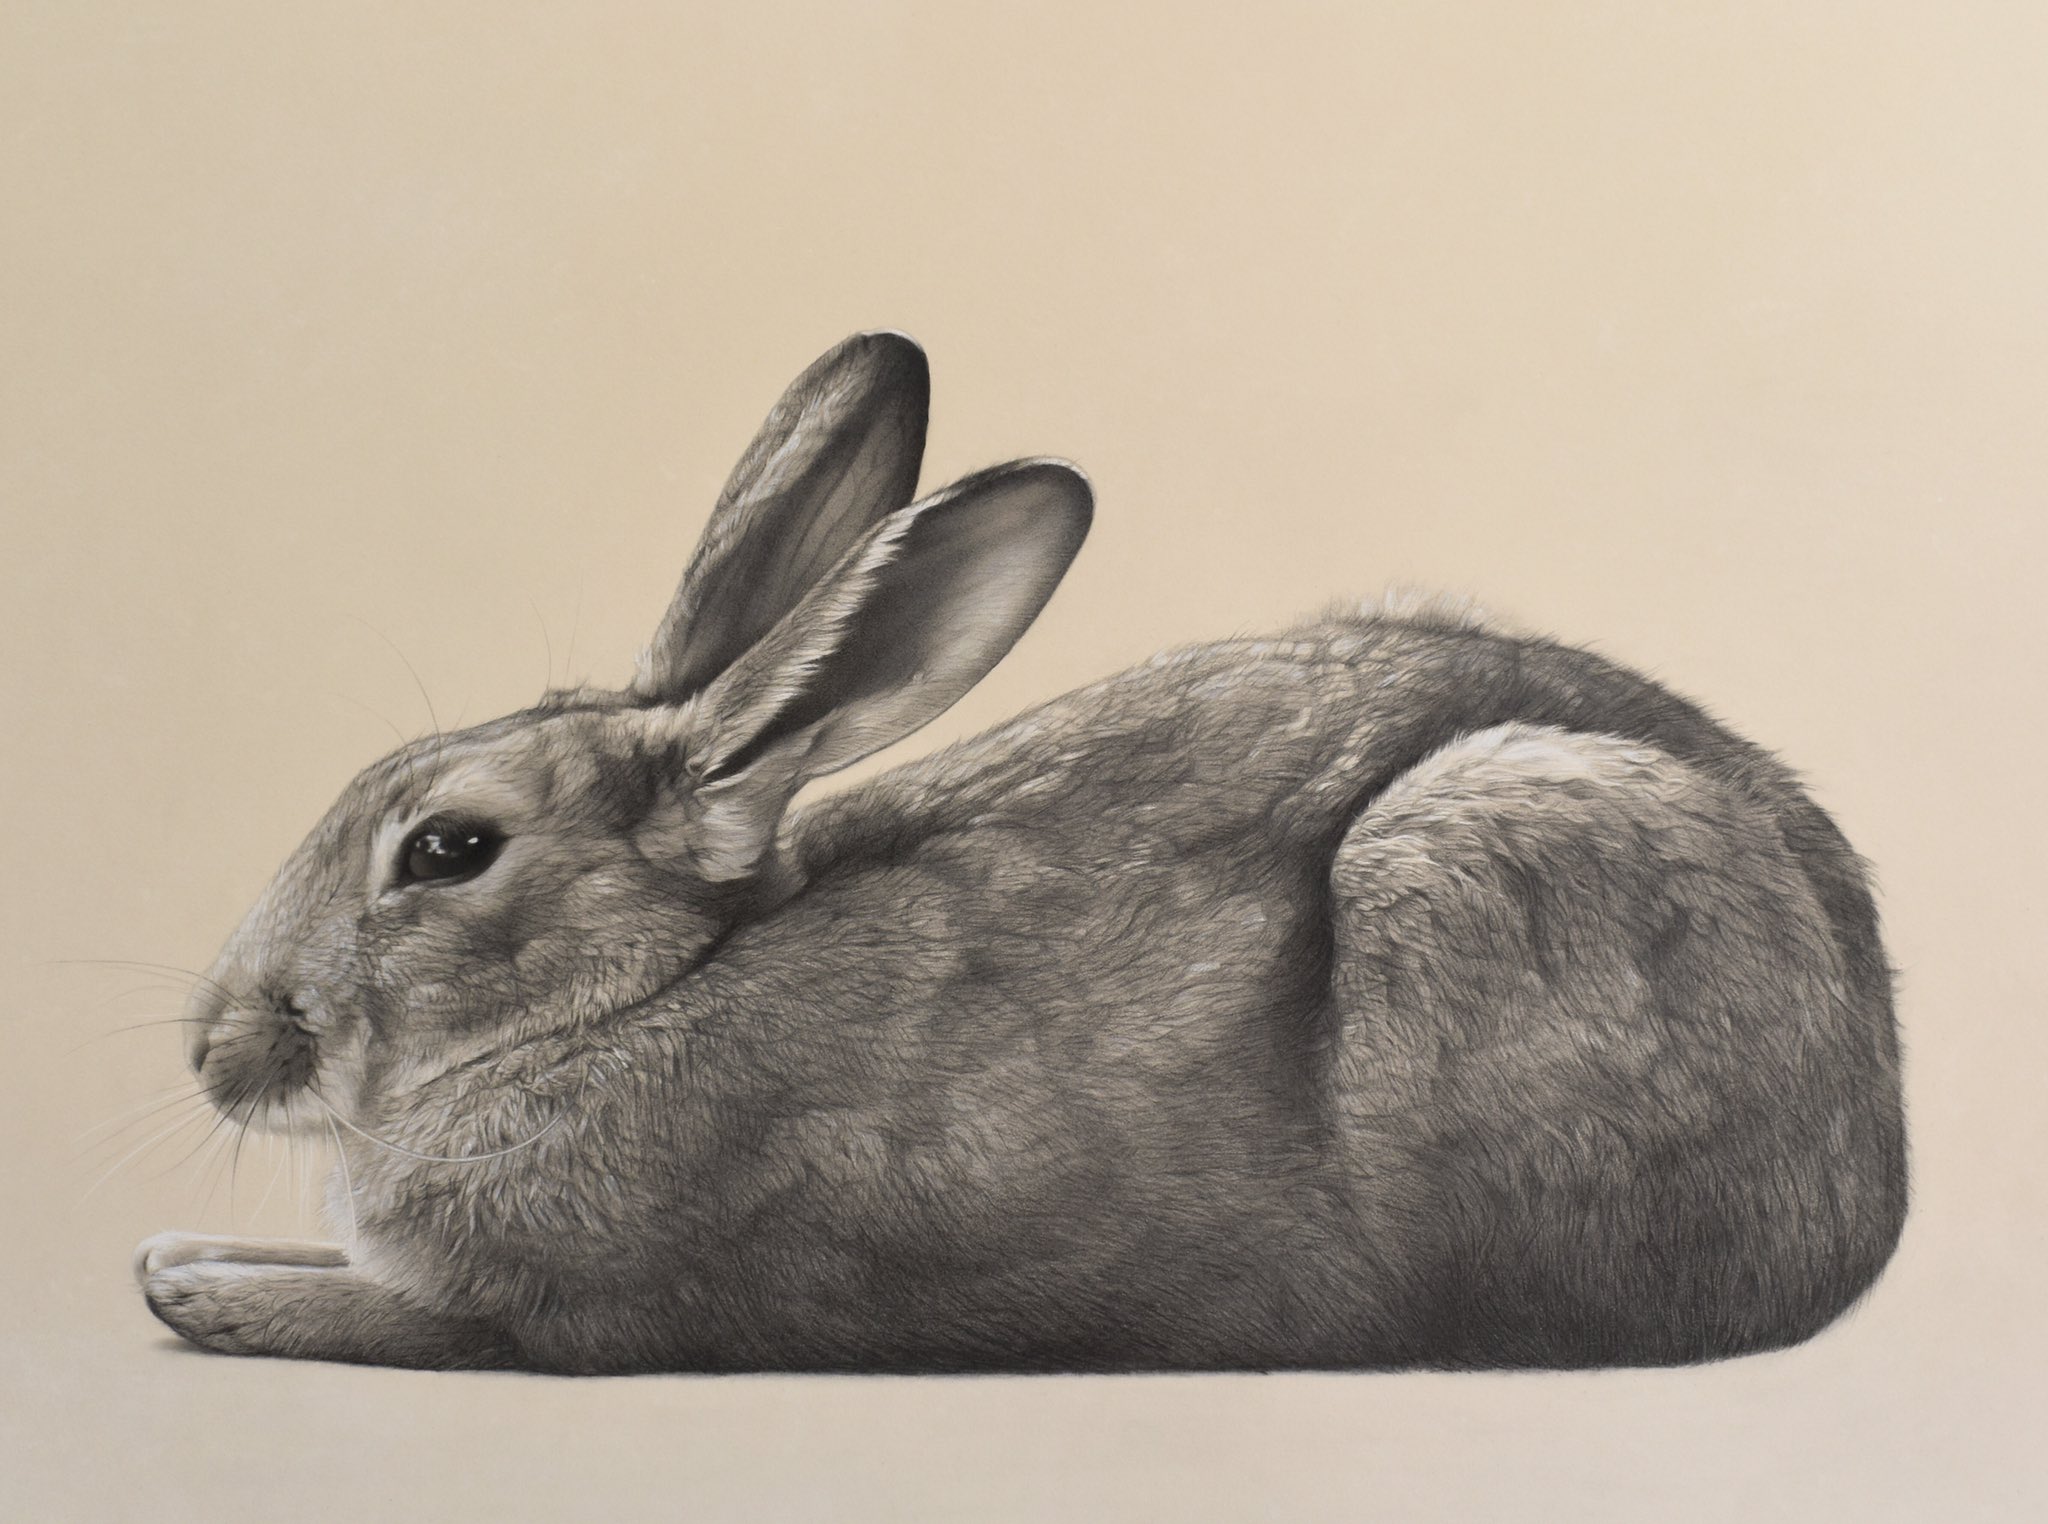 A pencil sketch of a white rabbit. #sketchbook #sketching #pencil #rabbit # bunny #artist #happy | Bunny art, Bunny sketches, Bunny painting